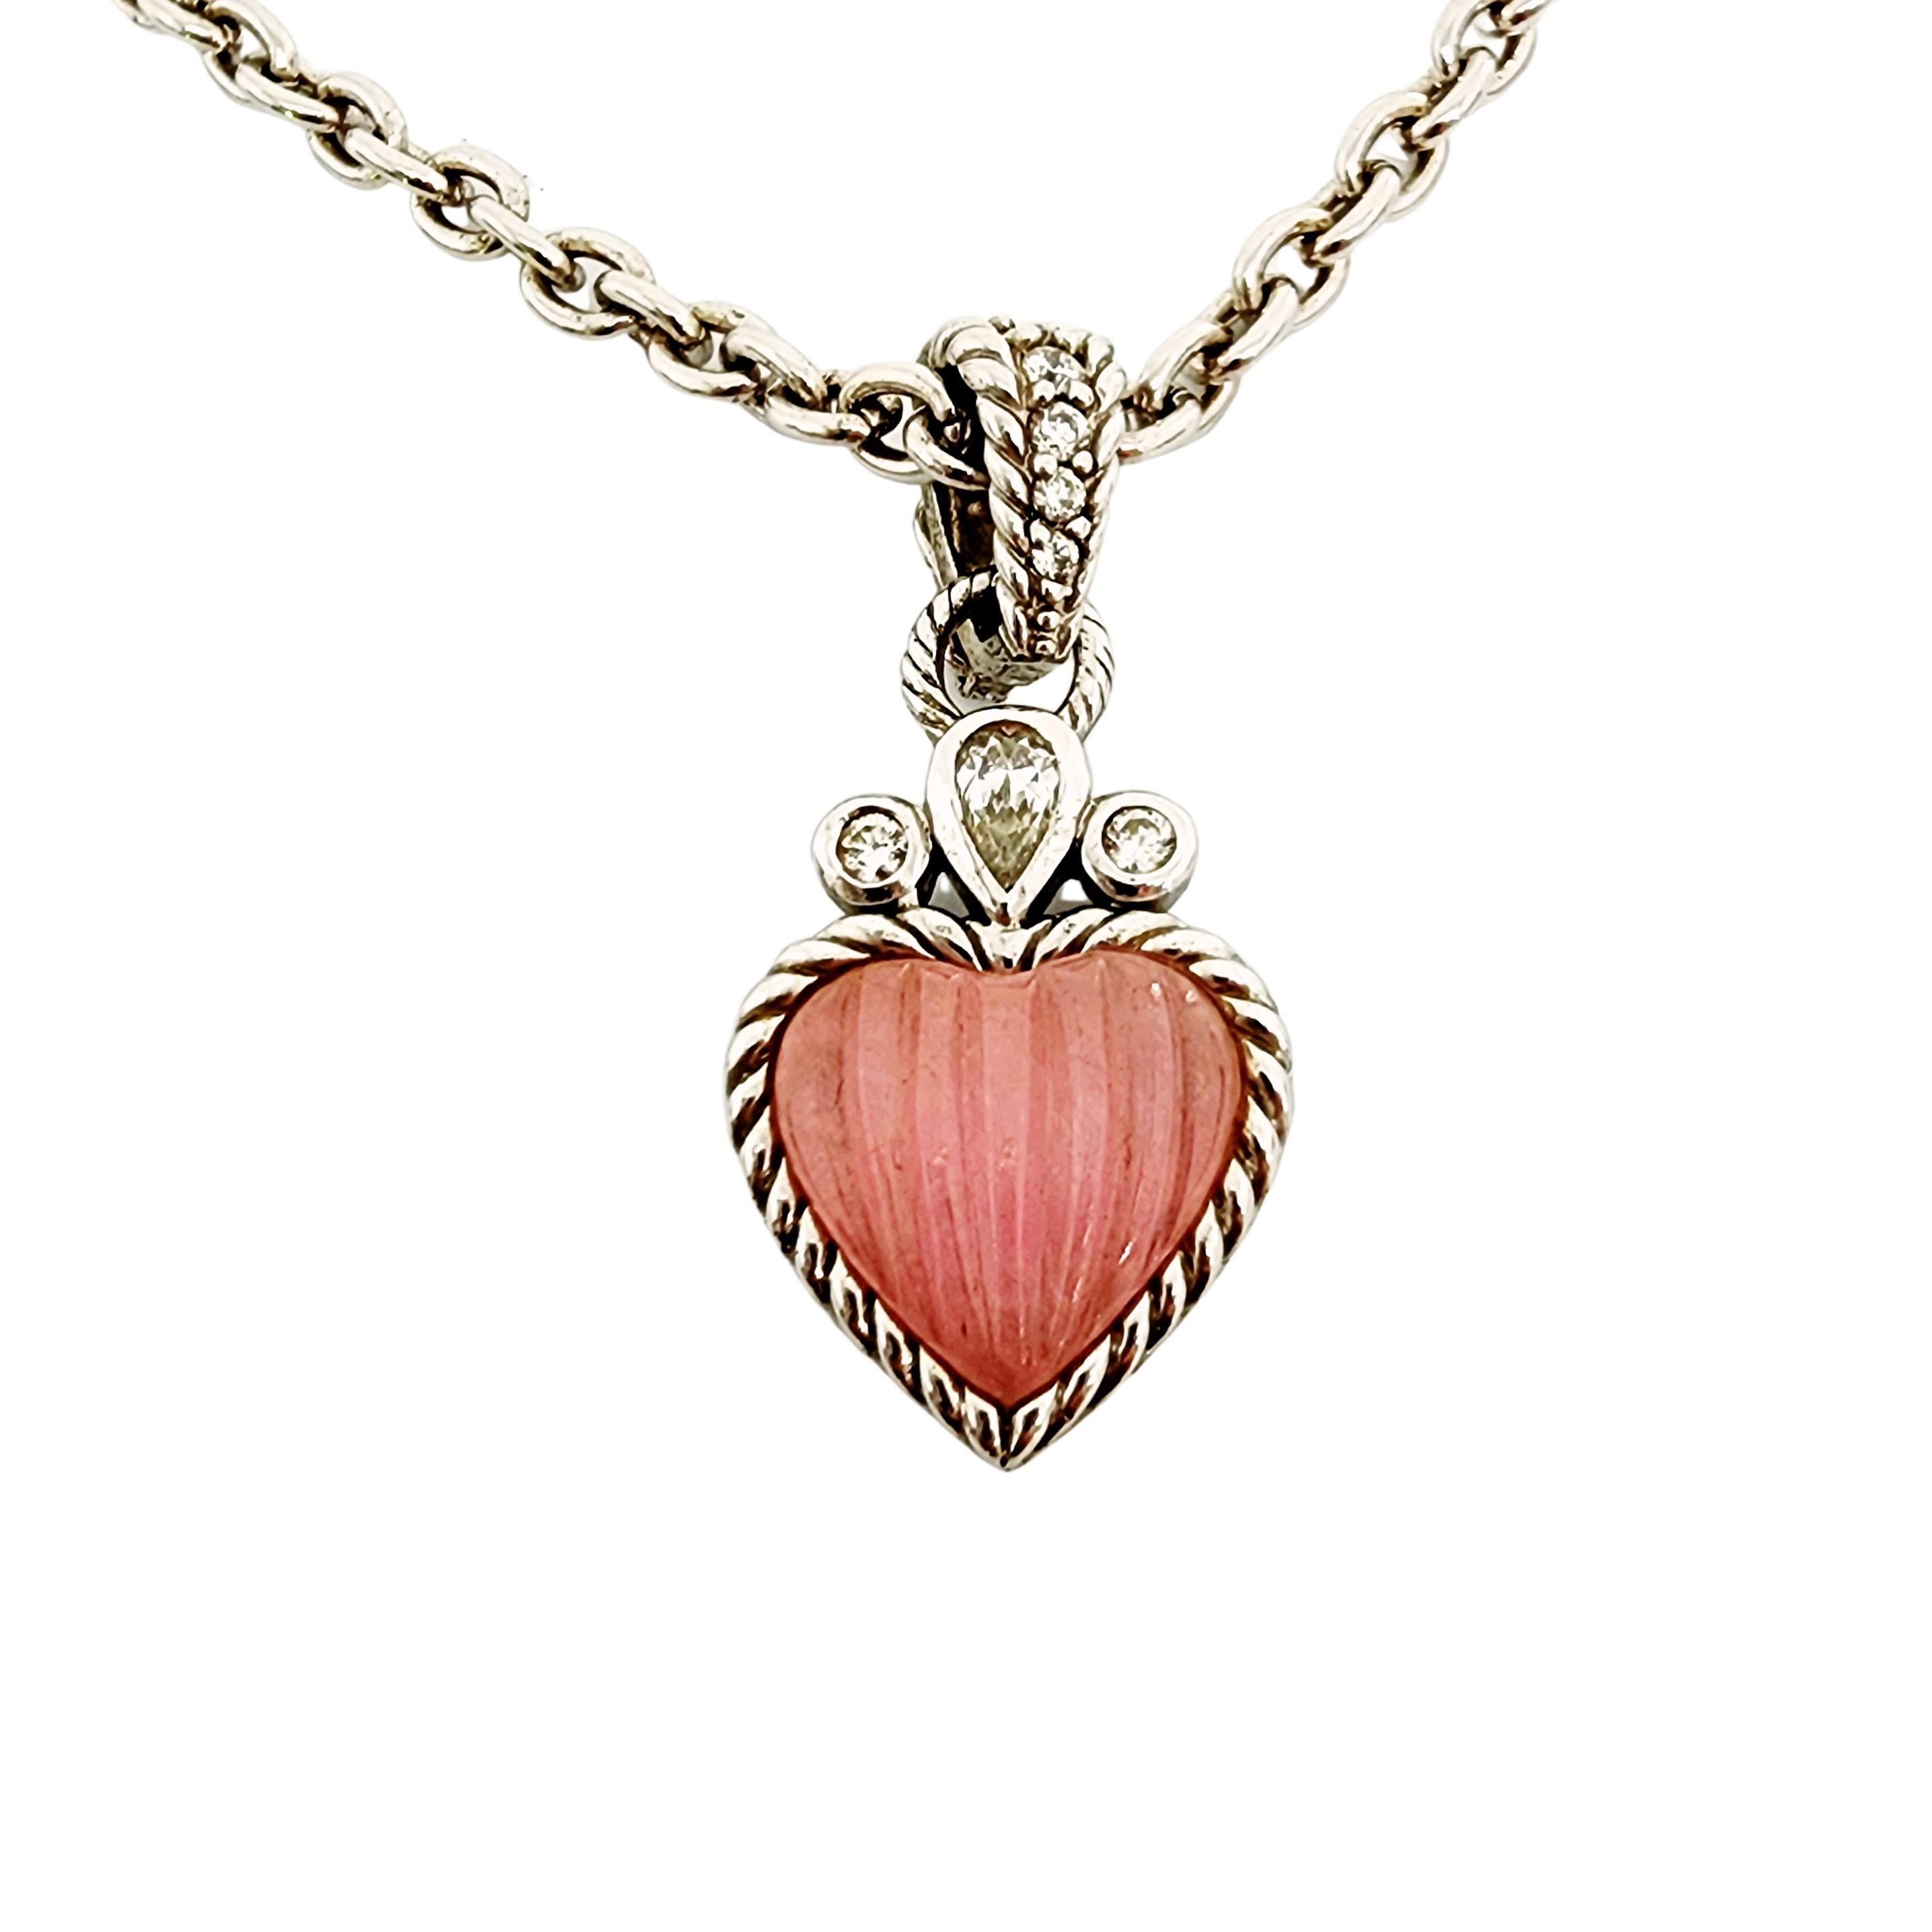 Sterling silver pink jadelite and CZ  heart enhancer with pink jadelite bead necklace by Judith Ripka

Designer piece featuring pink jadelite bead station chain with CZ accent textured lobster claw closure. Includes removable ribbed pink jadelite